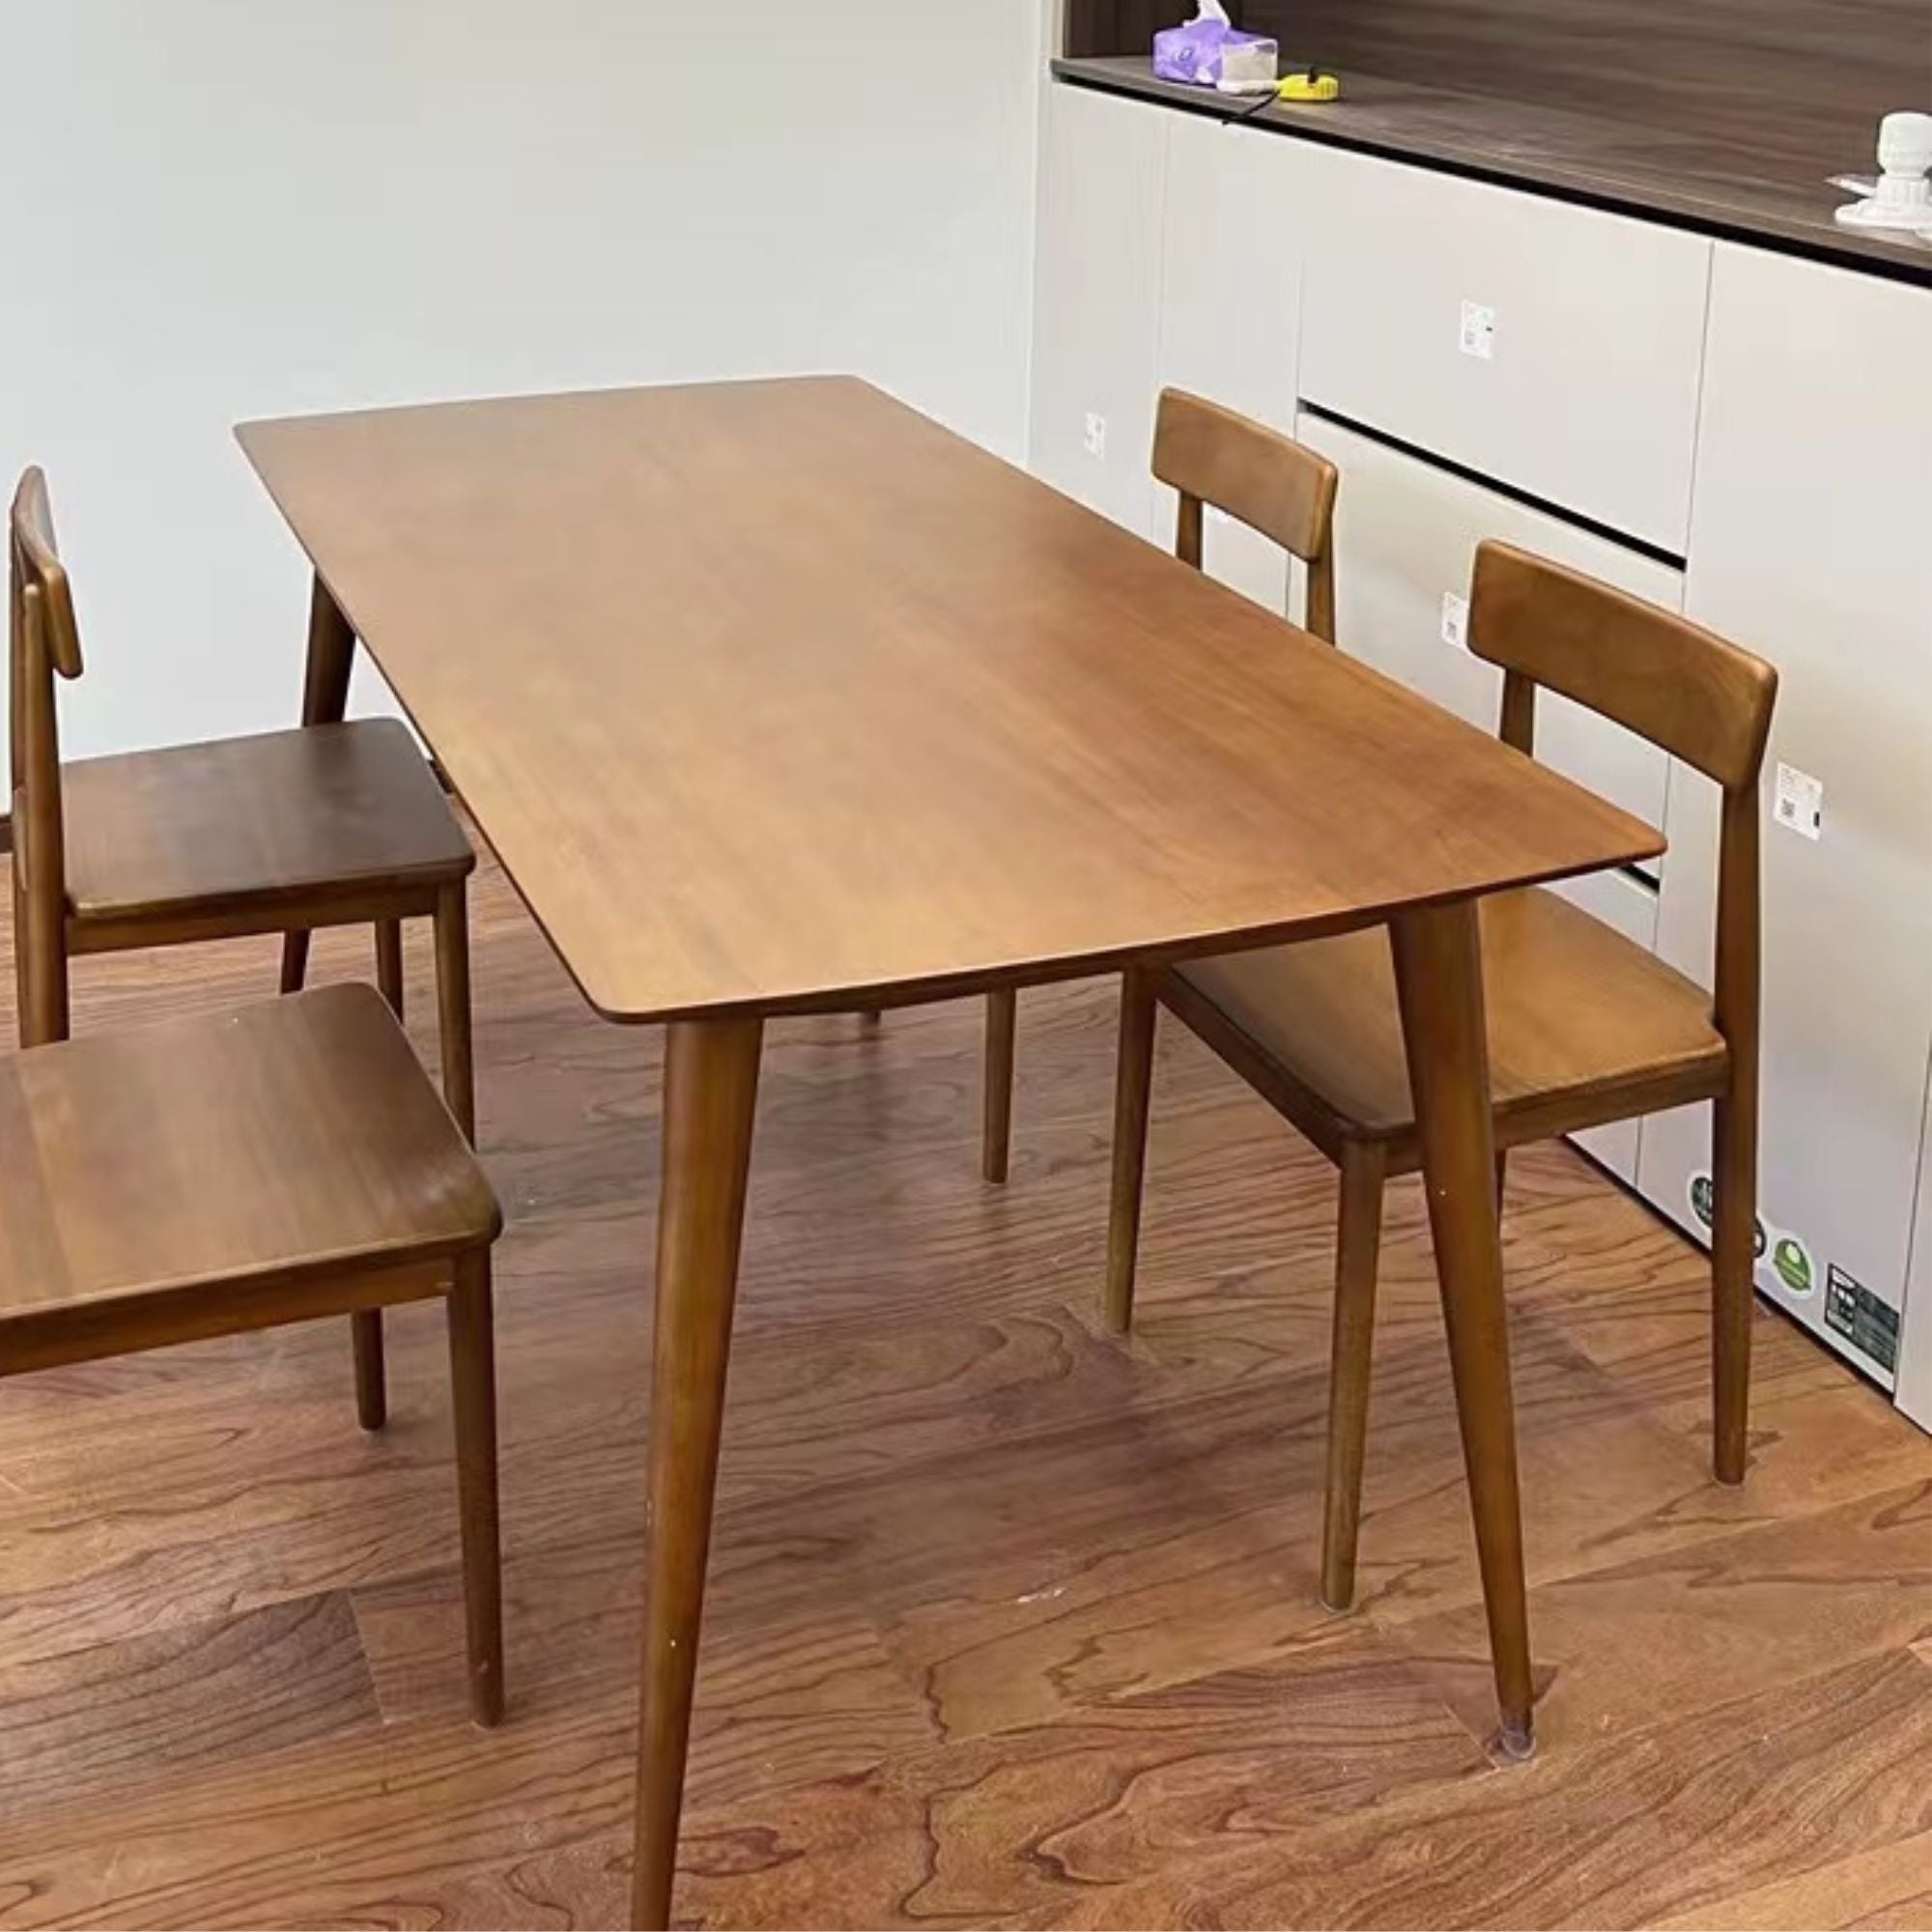 Tranquil poplar wood dining set with chair